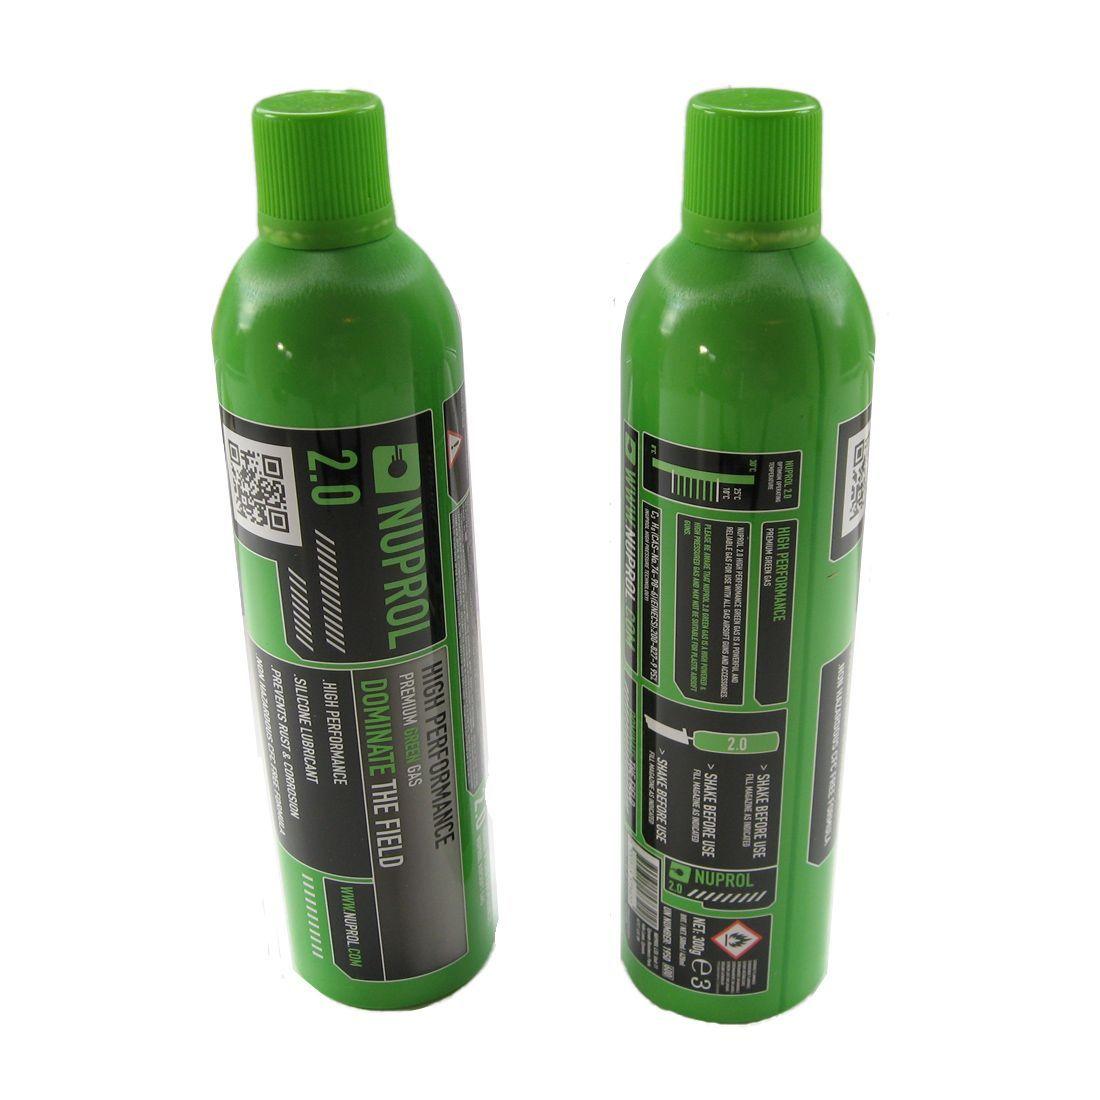 Red and Green Gas Logo - Canisters Of Nuprol 2.0 Premium Green Gas for GBB Airsoft Guns